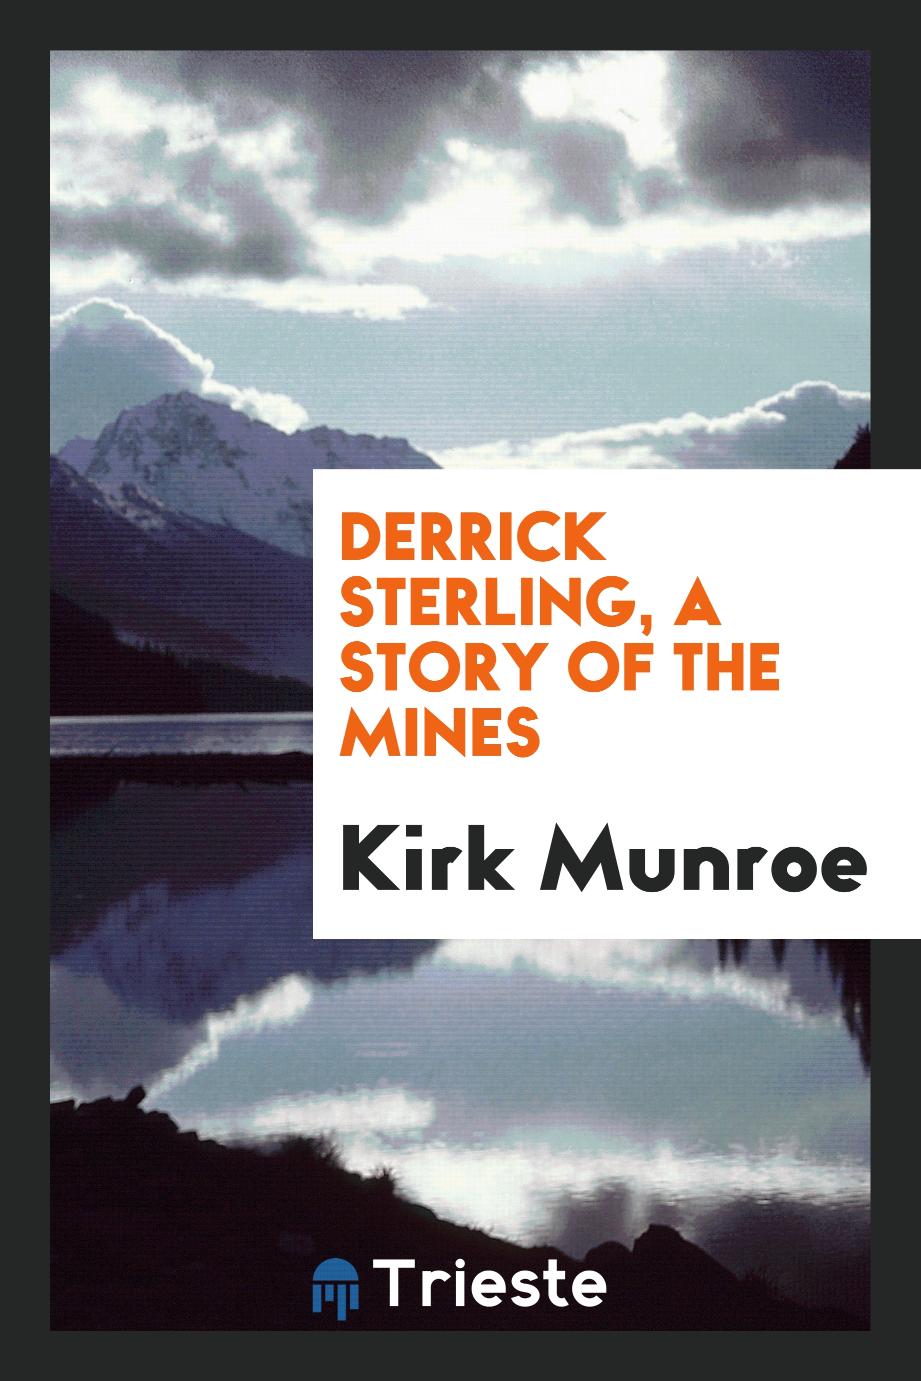 Derrick Sterling, a story of the mines